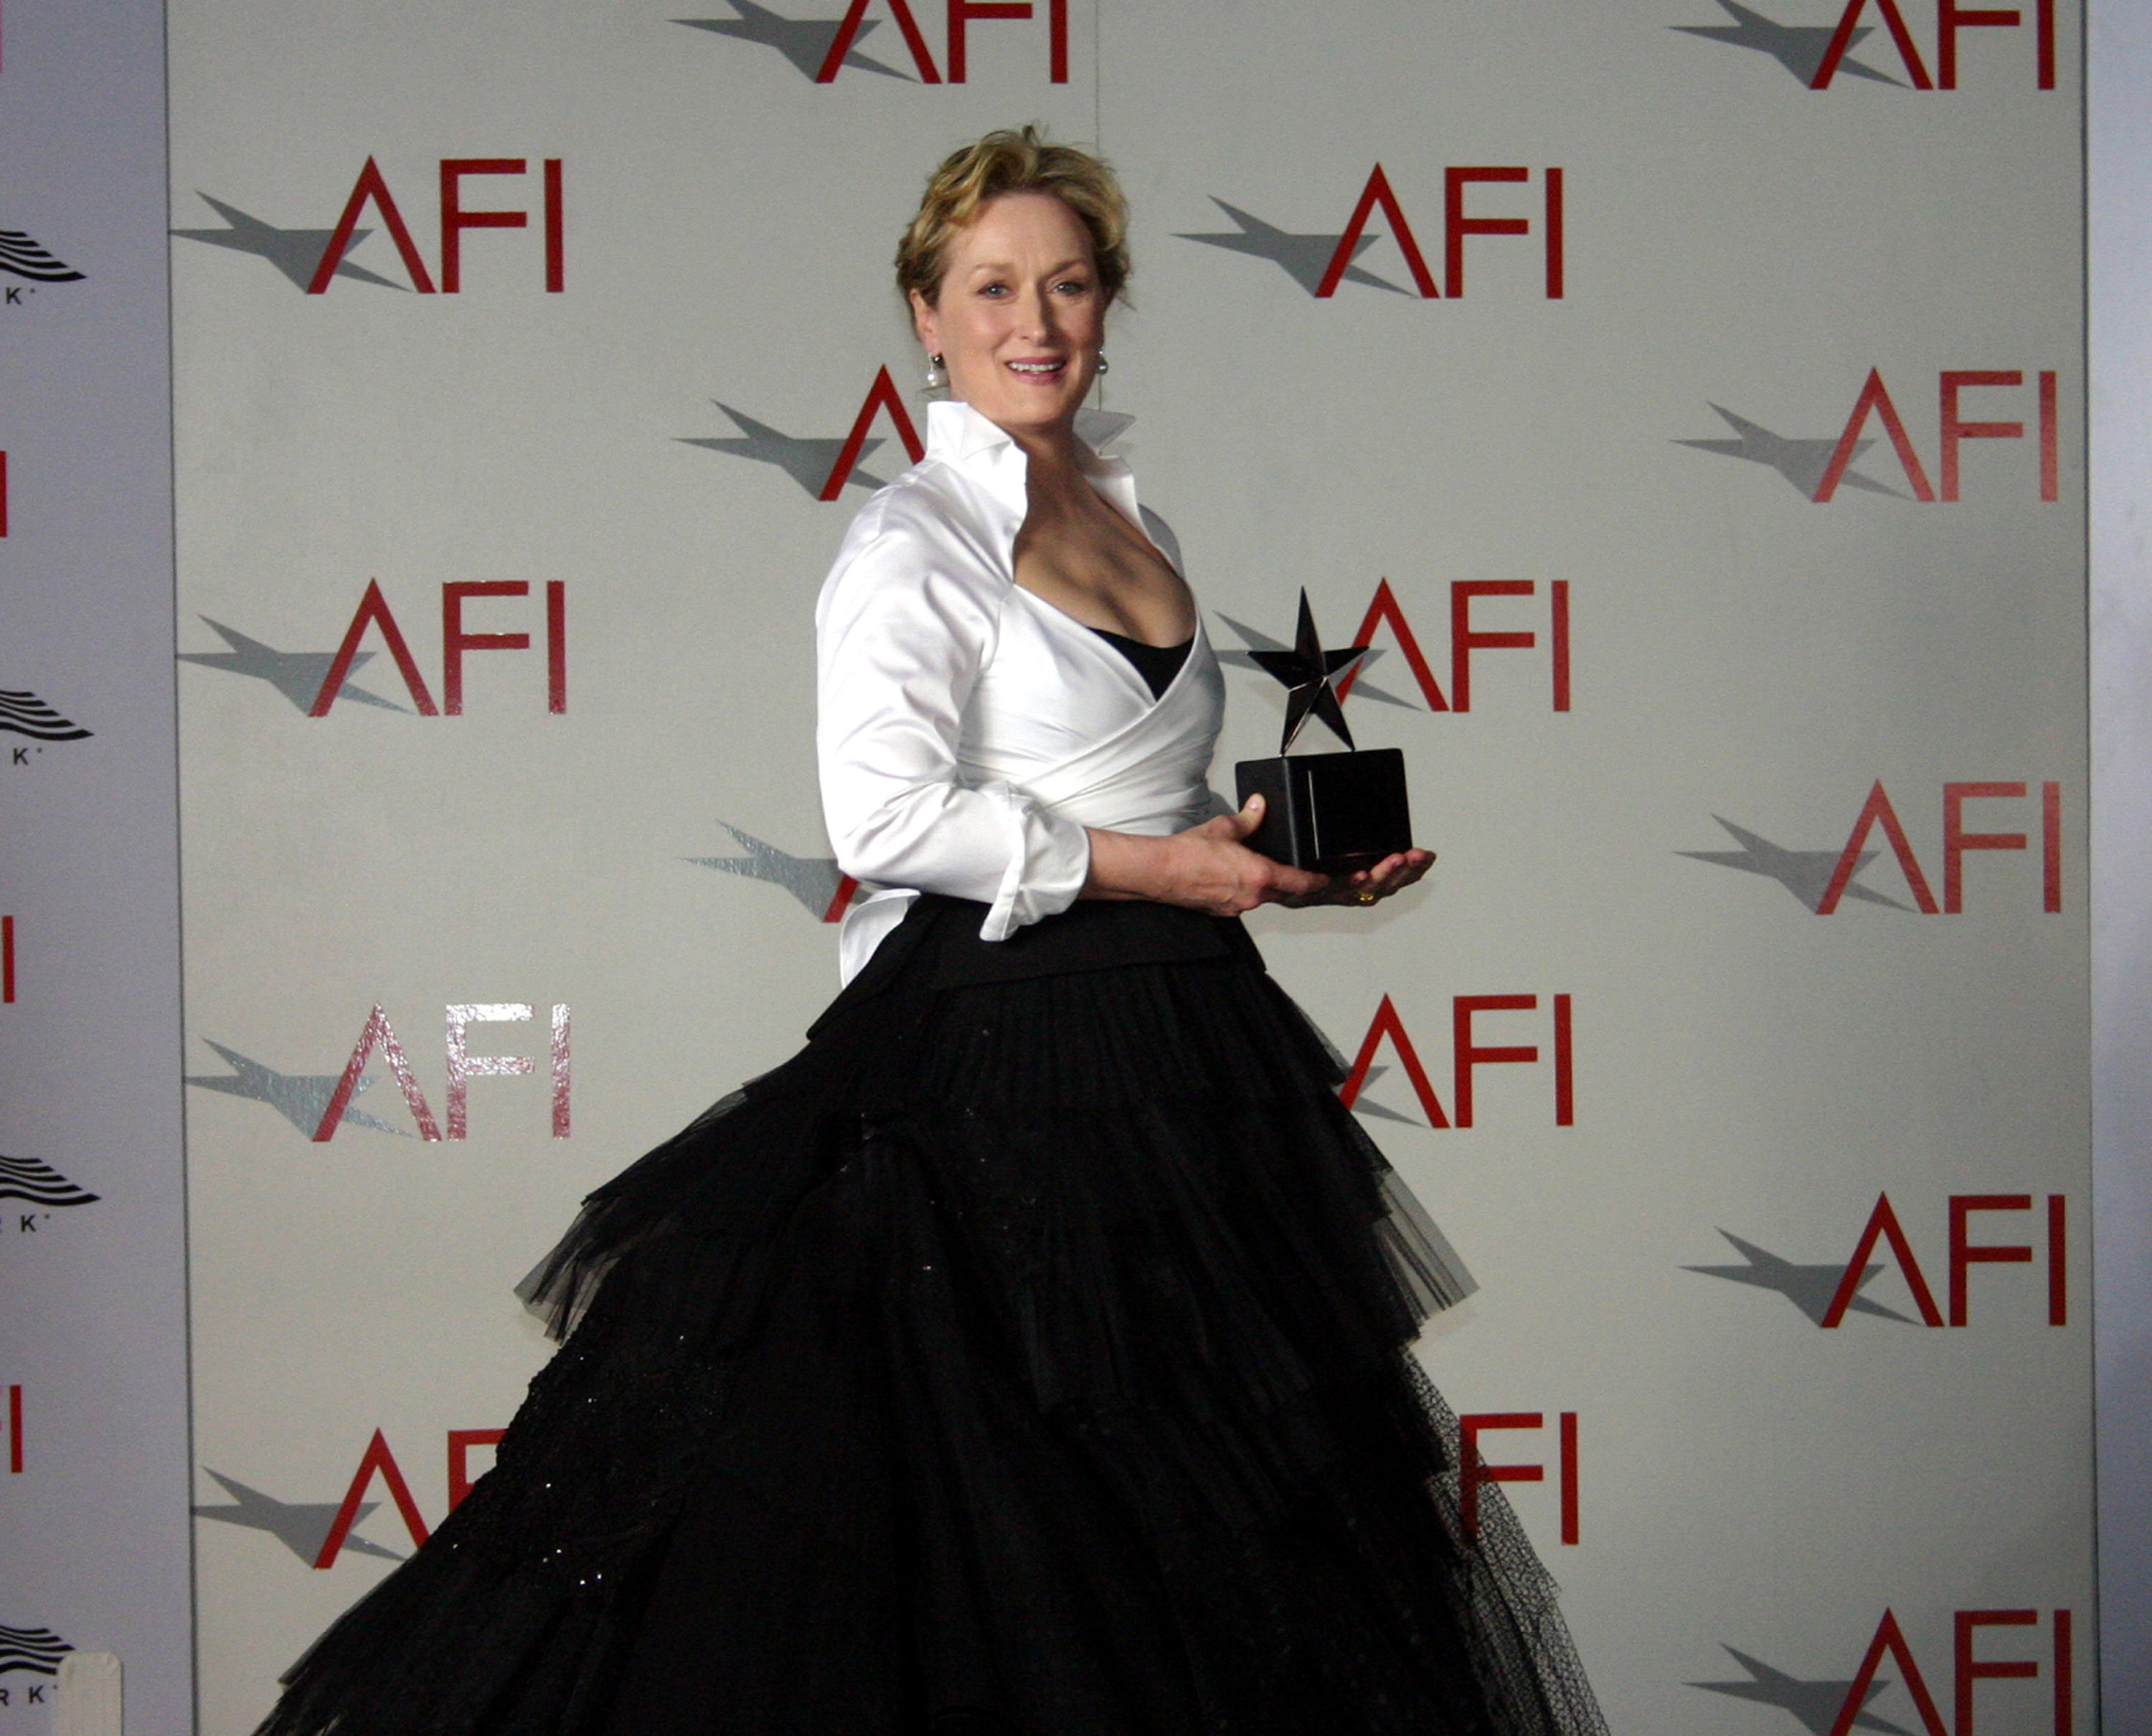 Meryl Streep attends the "32nd Annual AFI Lifetime Achievement Award: A Tribute to Meryl Streep" held at the Kodak Theatre, June 10, 2004 in Hollywood, California. (Photo by AFI via Getty Images)